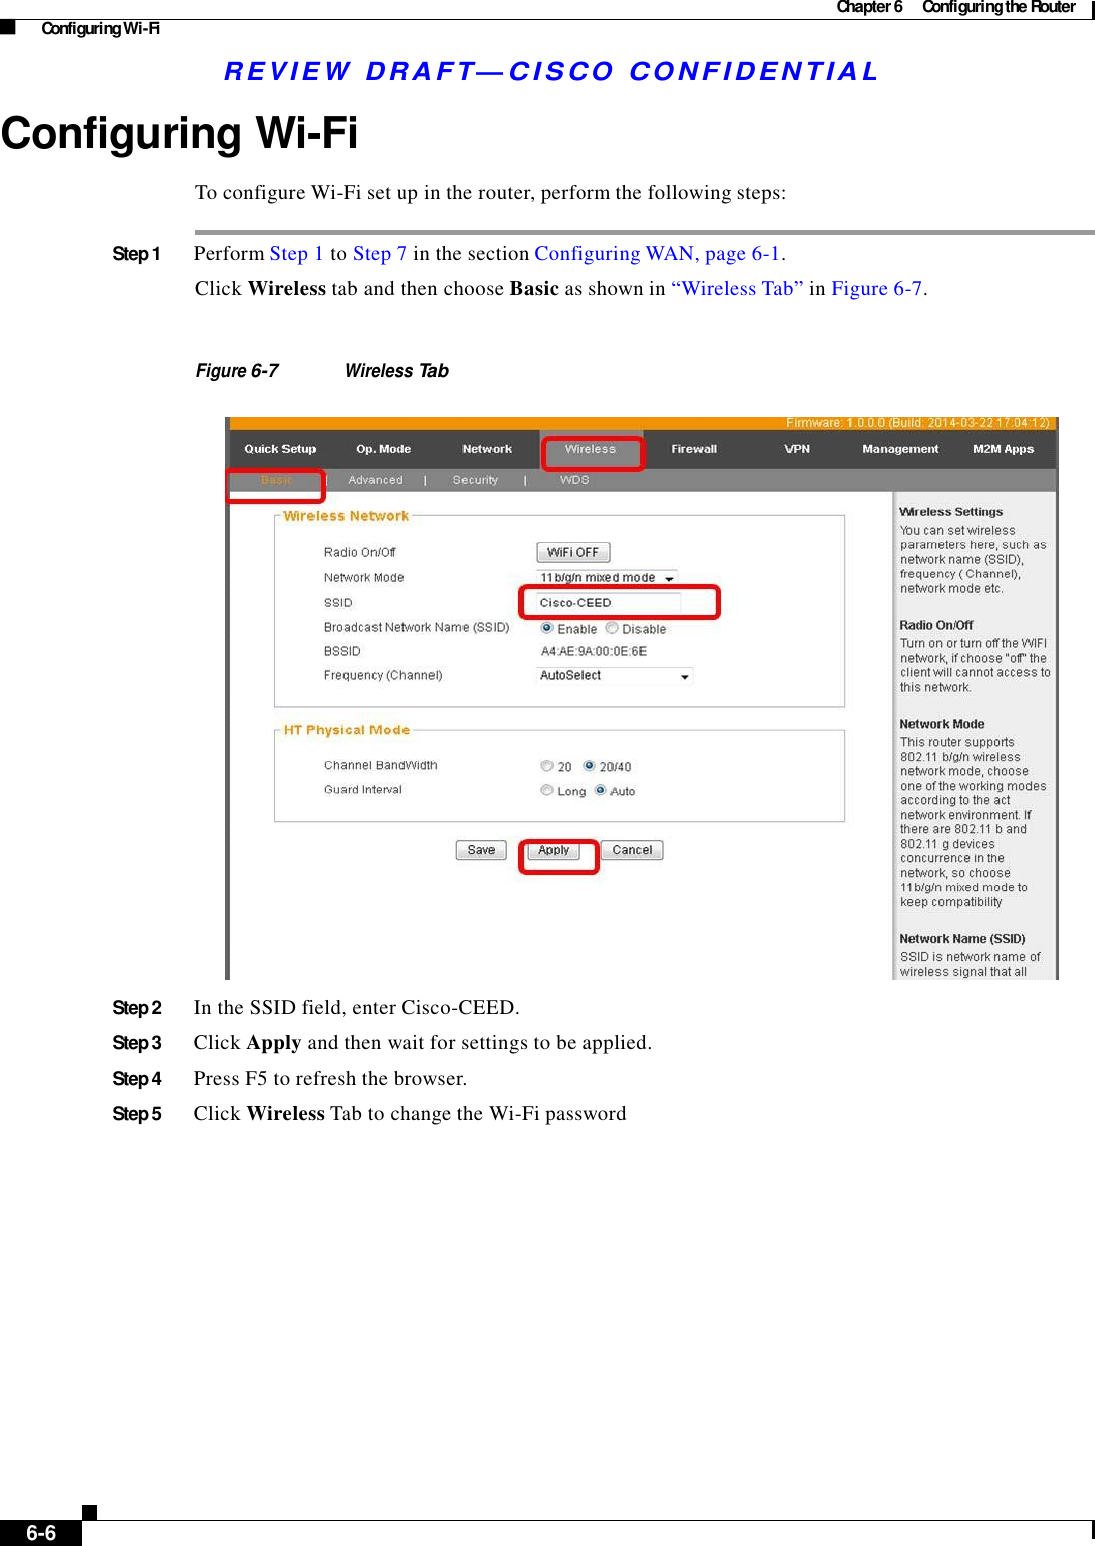 Chapter 6  Configuring the Router Configuring Wi-Fi R E V IE W  DRAFT— CISC O  C O N F ID E NT IA L    Configuring Wi-Fi  To configure Wi-Fi set up in the router, perform the following steps:   Step 1  Perform Step 1 to Step 7 in the section Configuring WAN, page 6-1.  Click Wireless tab and then choose Basic as shown in “Wireless Tab” in Figure 6-7.    Figure 6-7 Wireless Tab     Step 2  In the SSID field, enter Cisco-CEED.  Step 3  Click Apply and then wait for settings to be applied.  Step 4  Press F5 to refresh the browser.  Step 5  Click Wireless Tab to change the Wi-Fi password                      6-6   